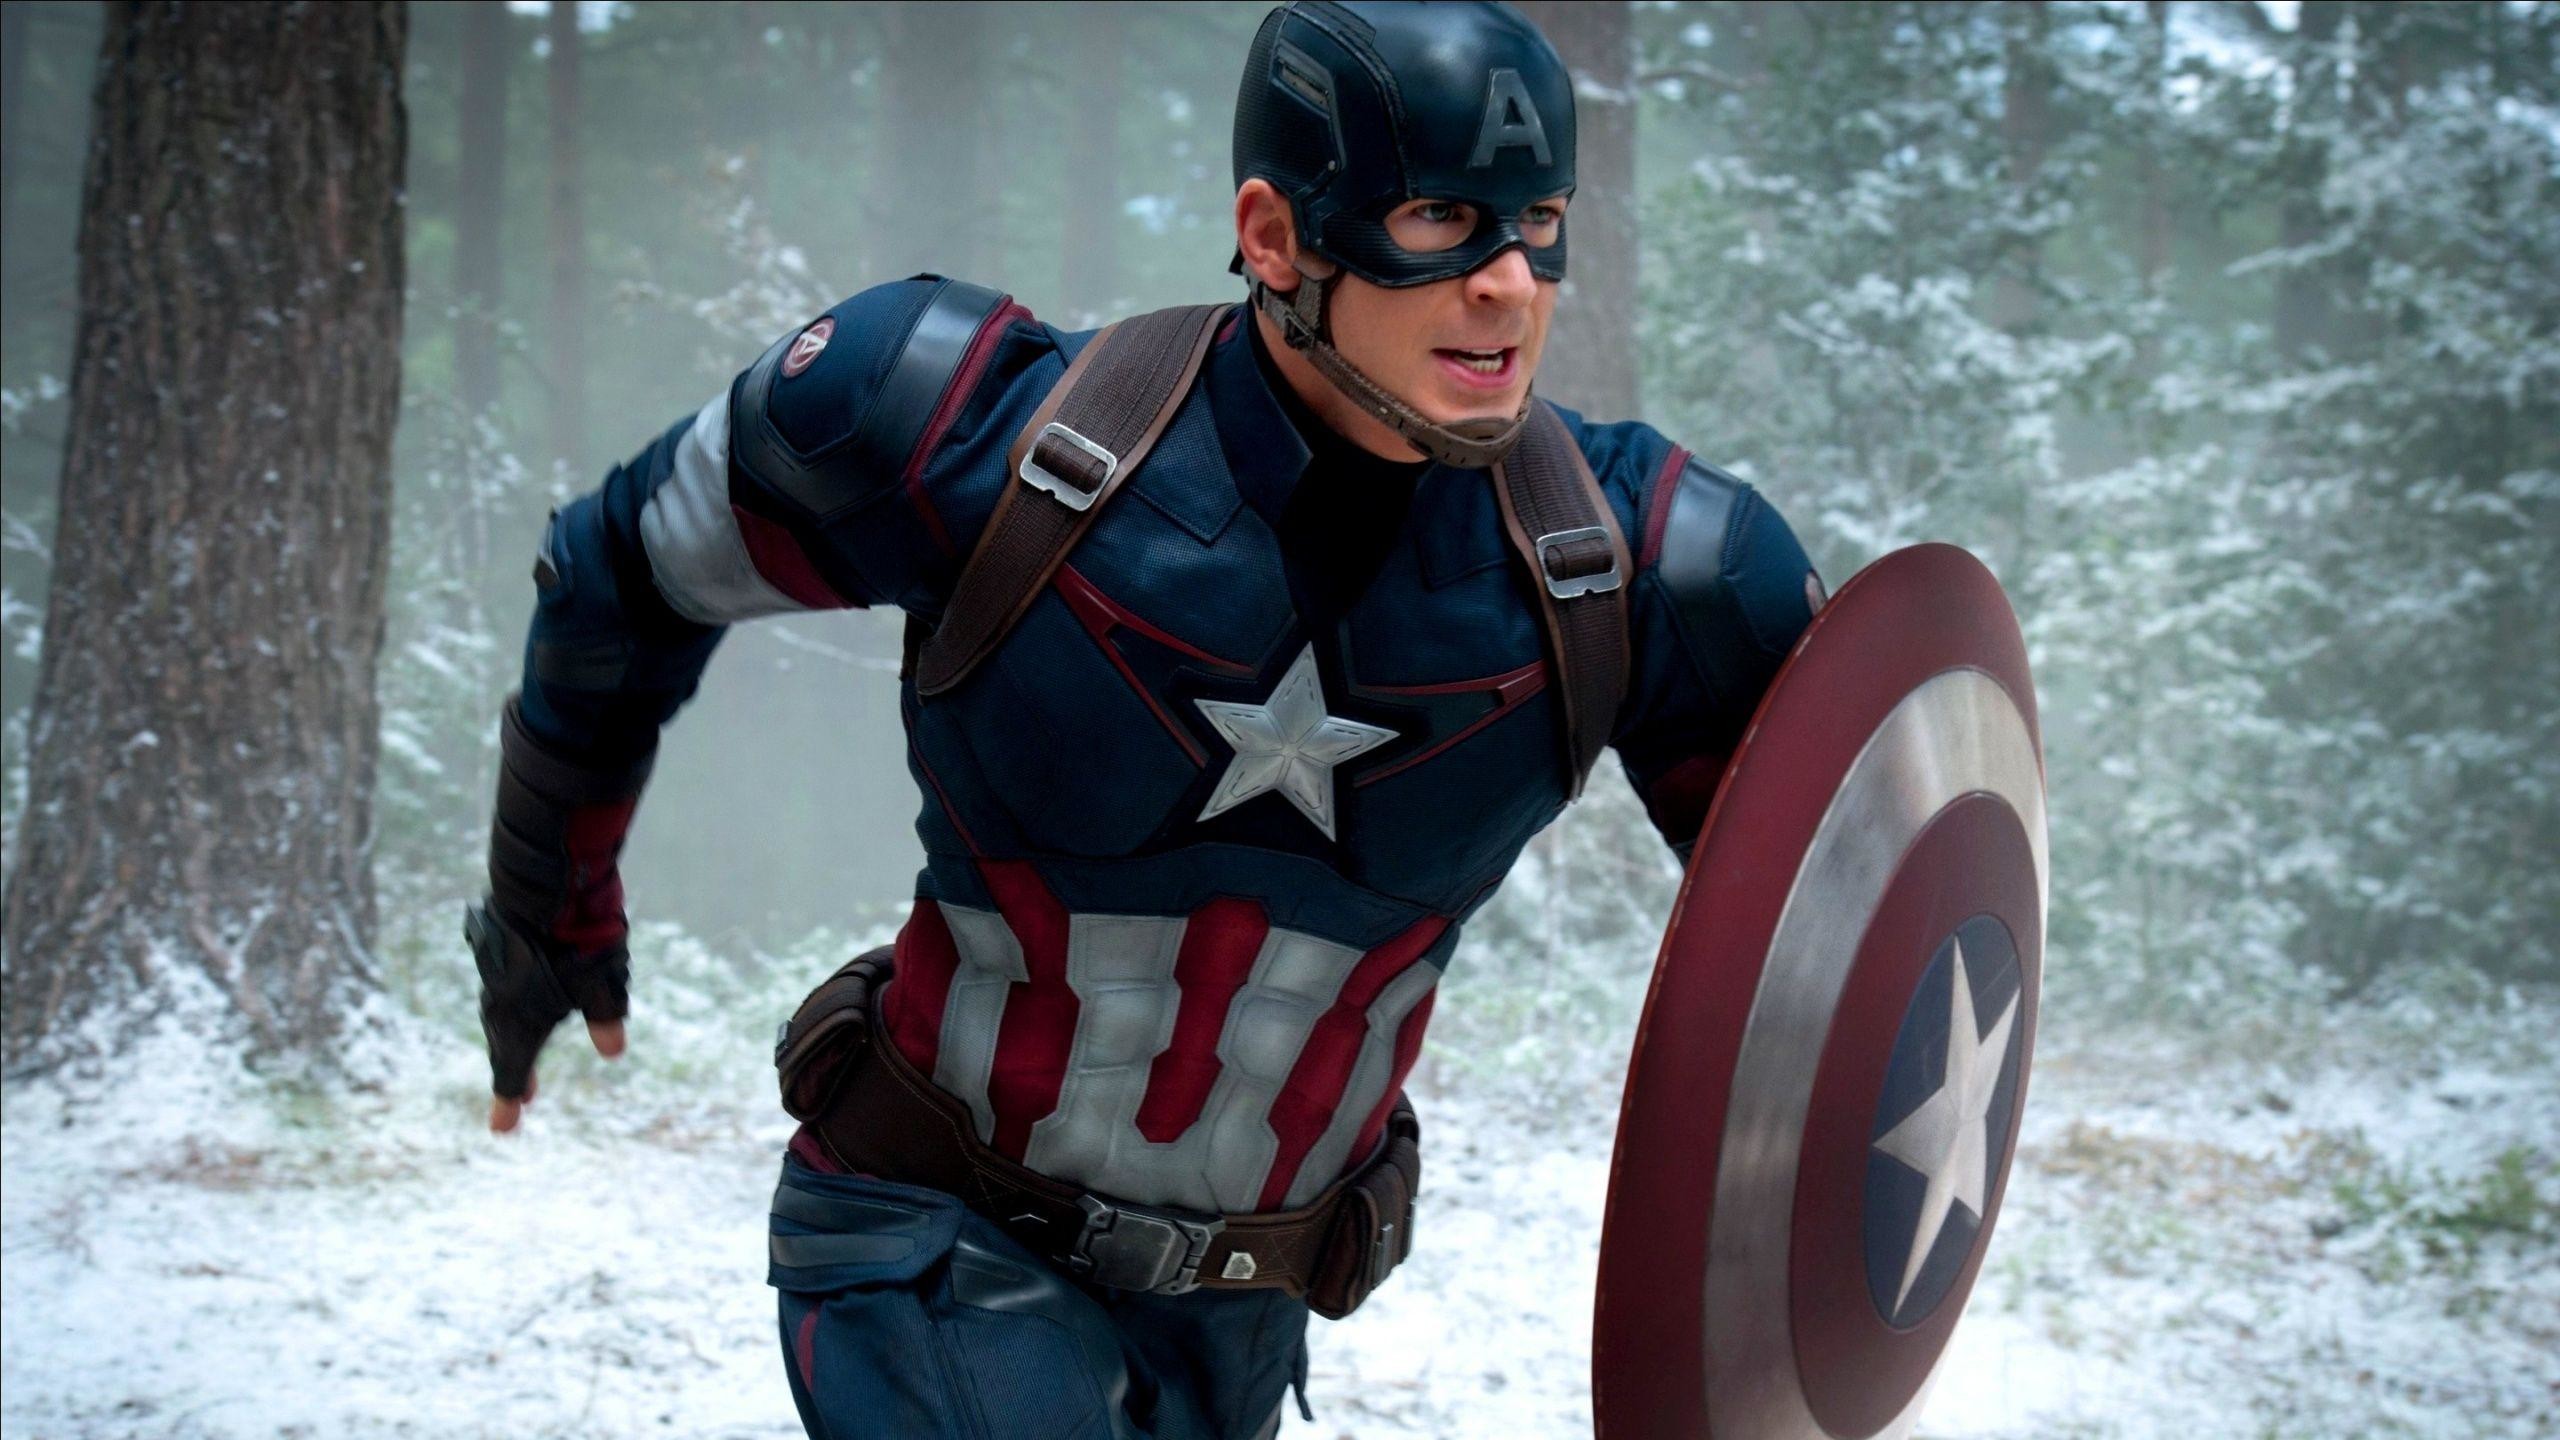 Captain America in Age of Ultron